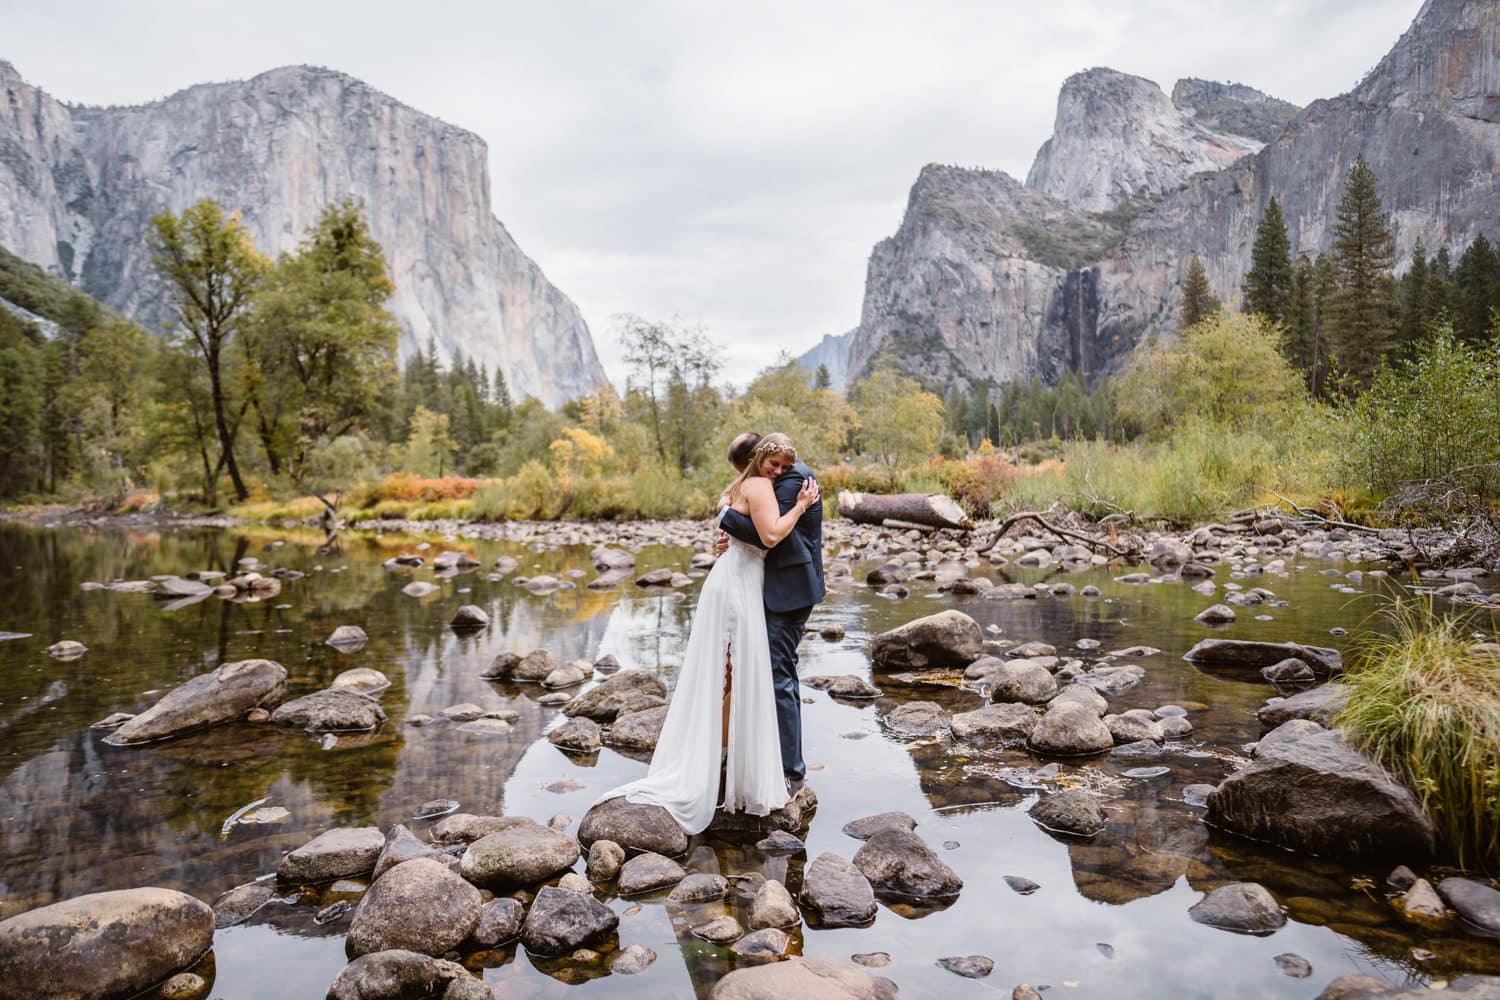 A couple hugging at Tunnel View in Yosemite National Park on their elopement morning.